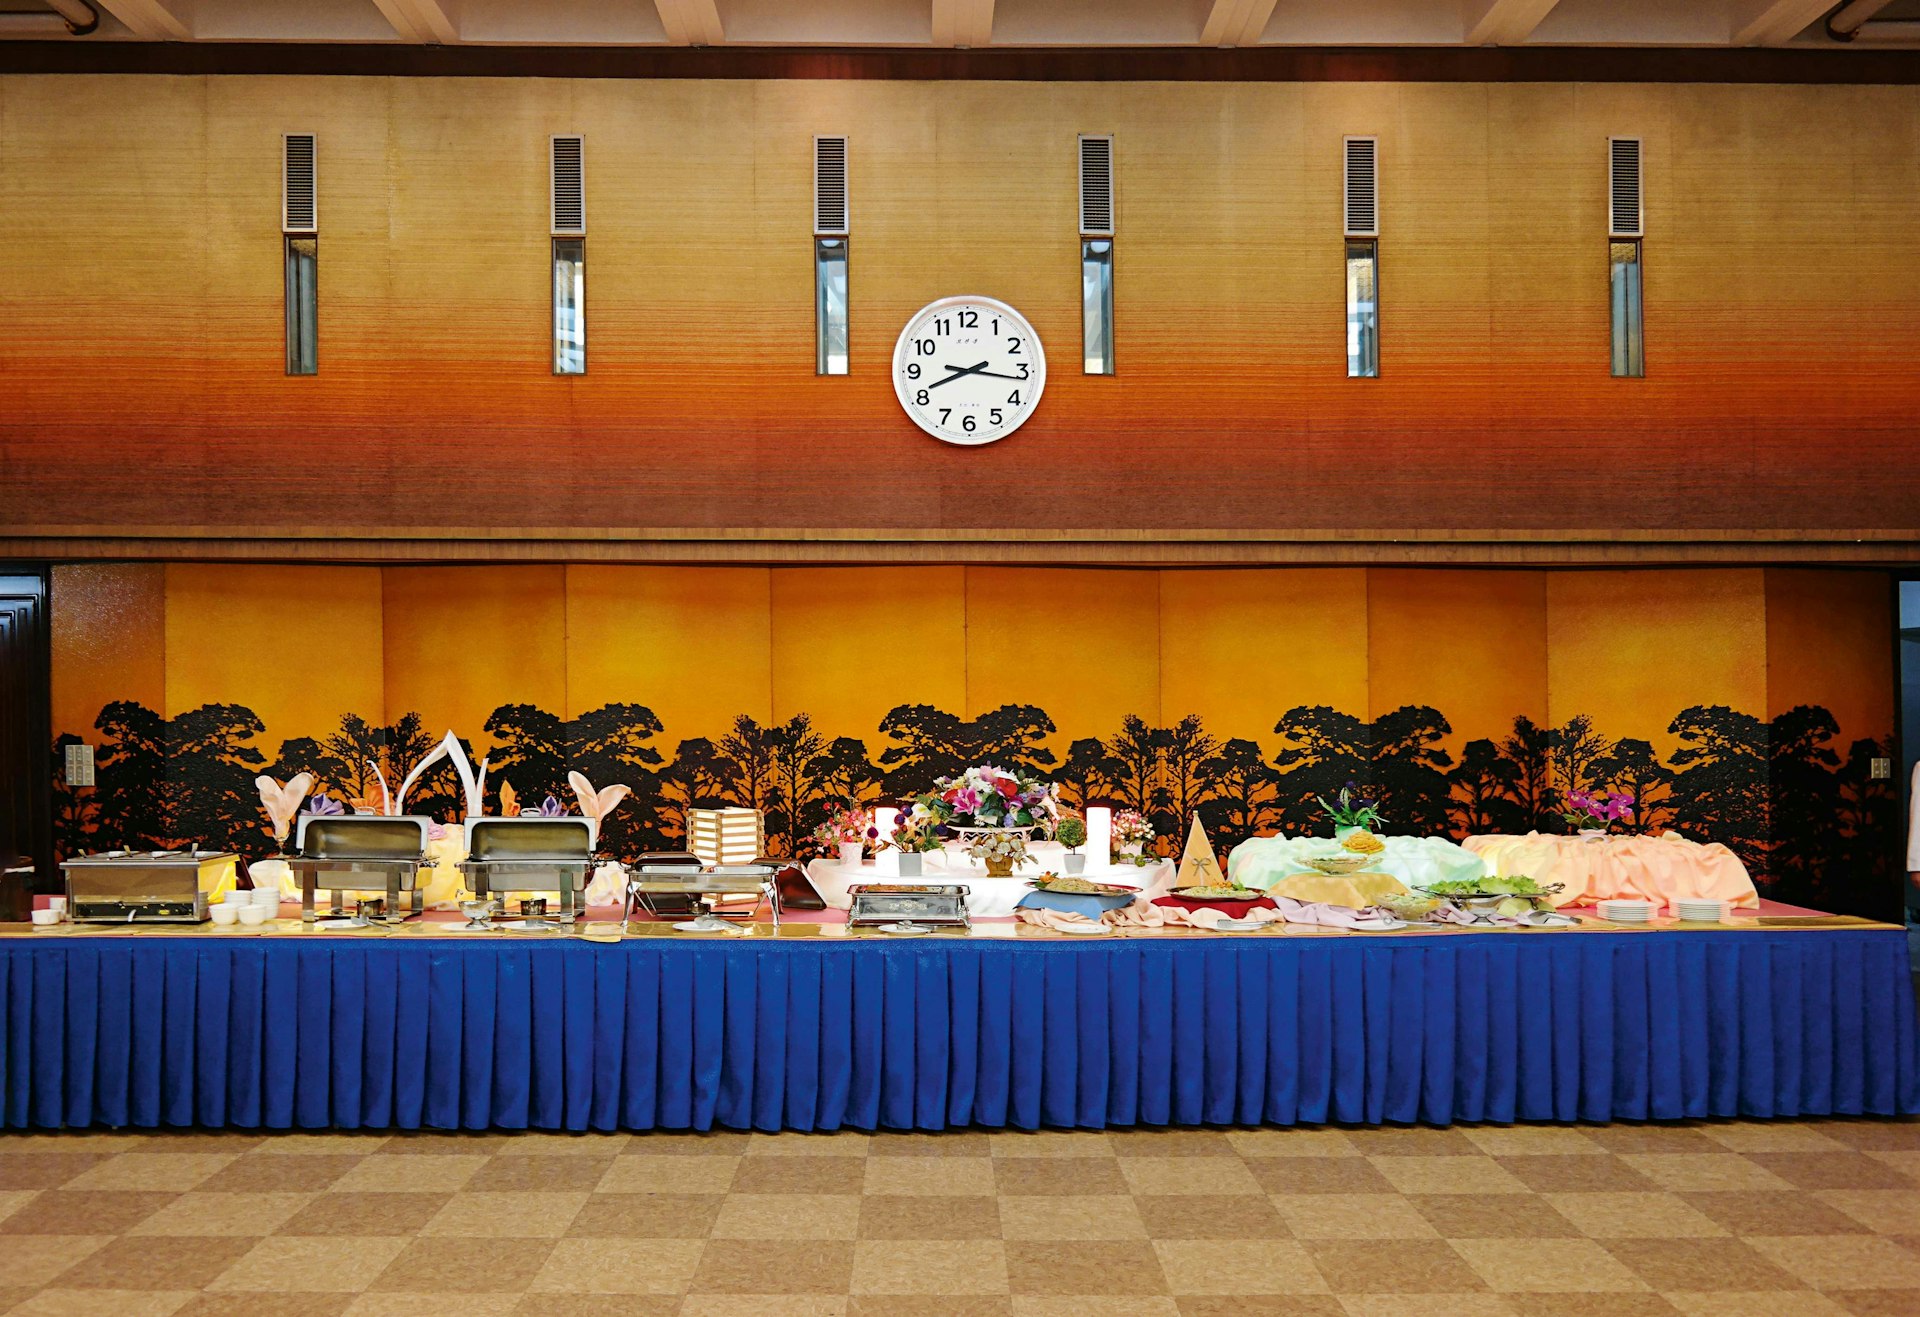 The breakfast buffet in the Koryo Hotel could be straight from a Wes Anderson film set. Built in 1985 as the main hotel for visiting foreigners, its twin 45-storey towers, connected by a bridge, are an iconic presence on the Pyongyang skyline. With a total of 500 rooms, the hotel also has a bookshop, movie room and banquet rooms, as well as a casino and “wading pool” in the basement. Both towers are crowned with revolving restaurants, although one is off limits as it overlooks a residential area of the Pyongyang elite.